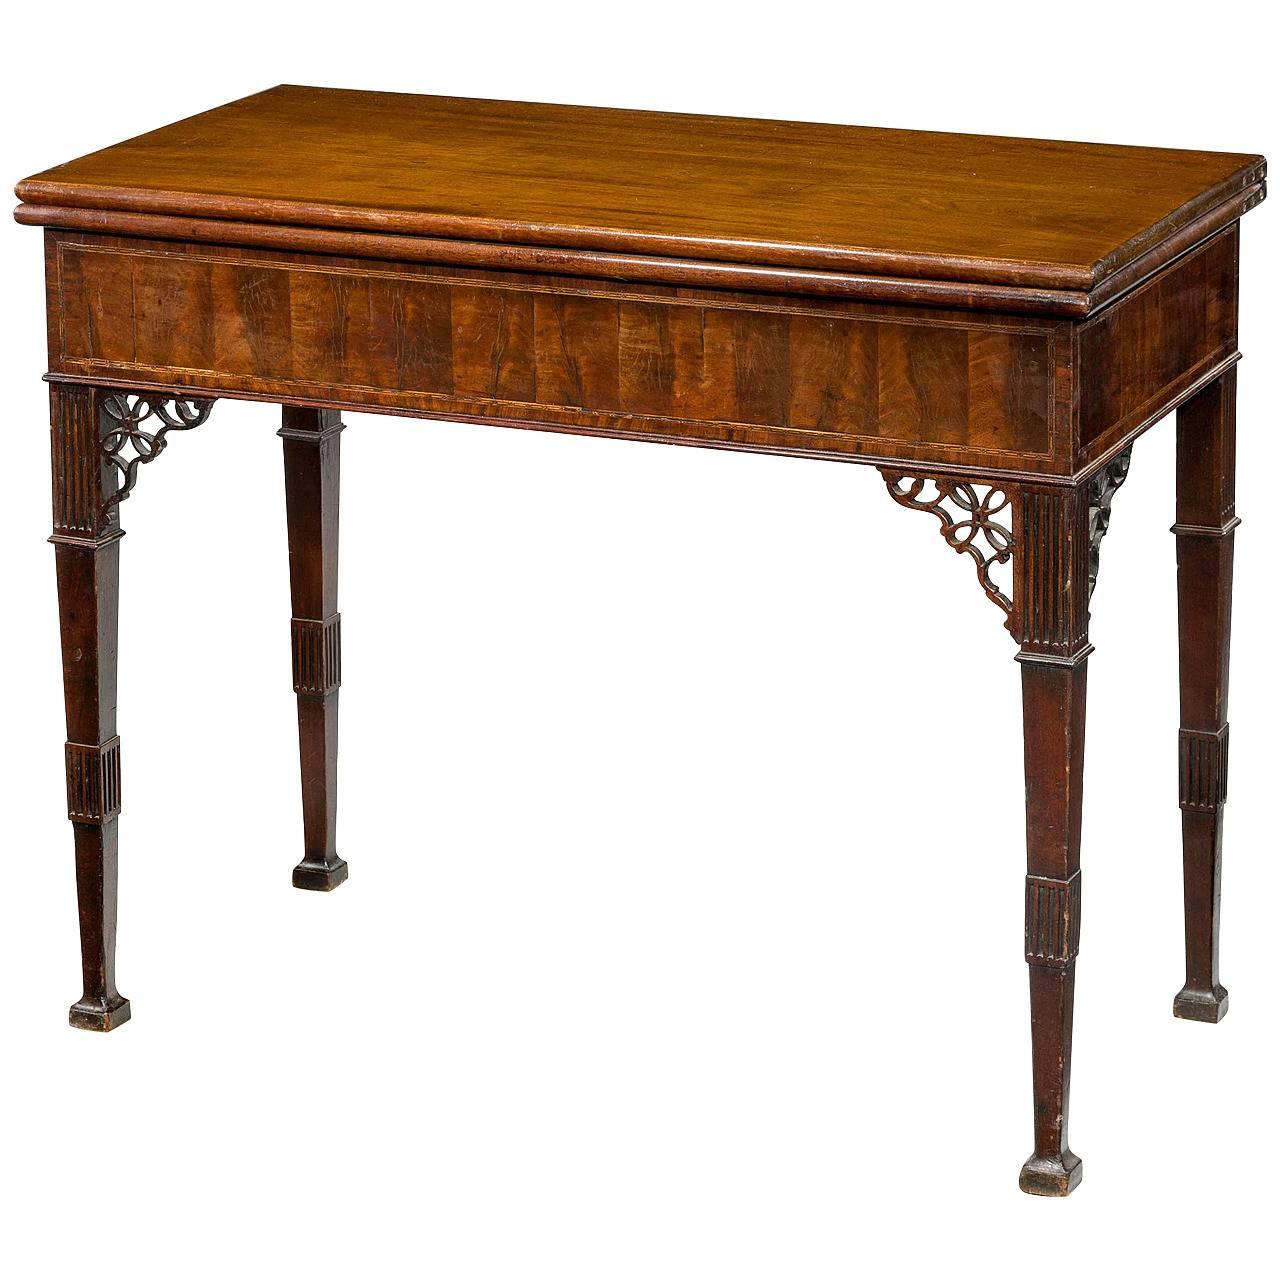 Chippendale Period Mahogany Tea Table